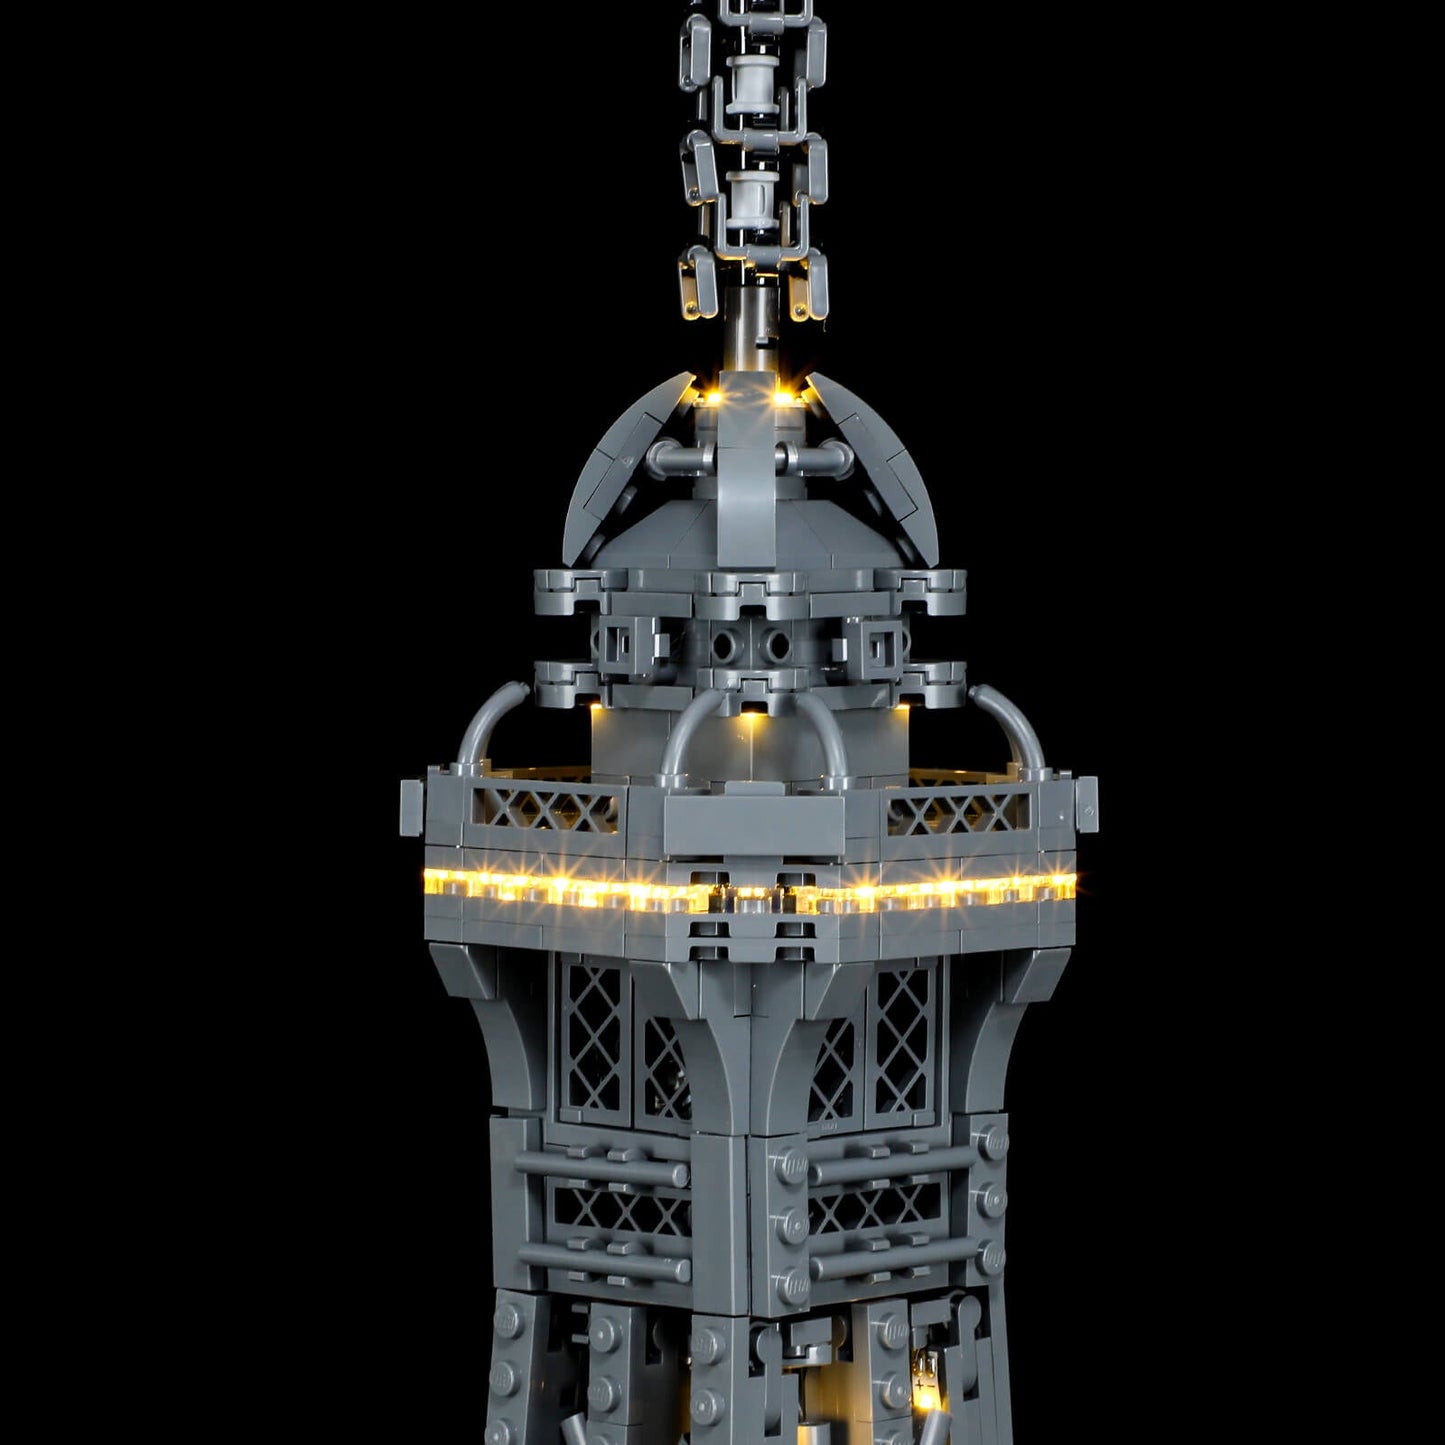 Lego Eiffel Tower 10307 Gustave Eiffel’s private office at the top